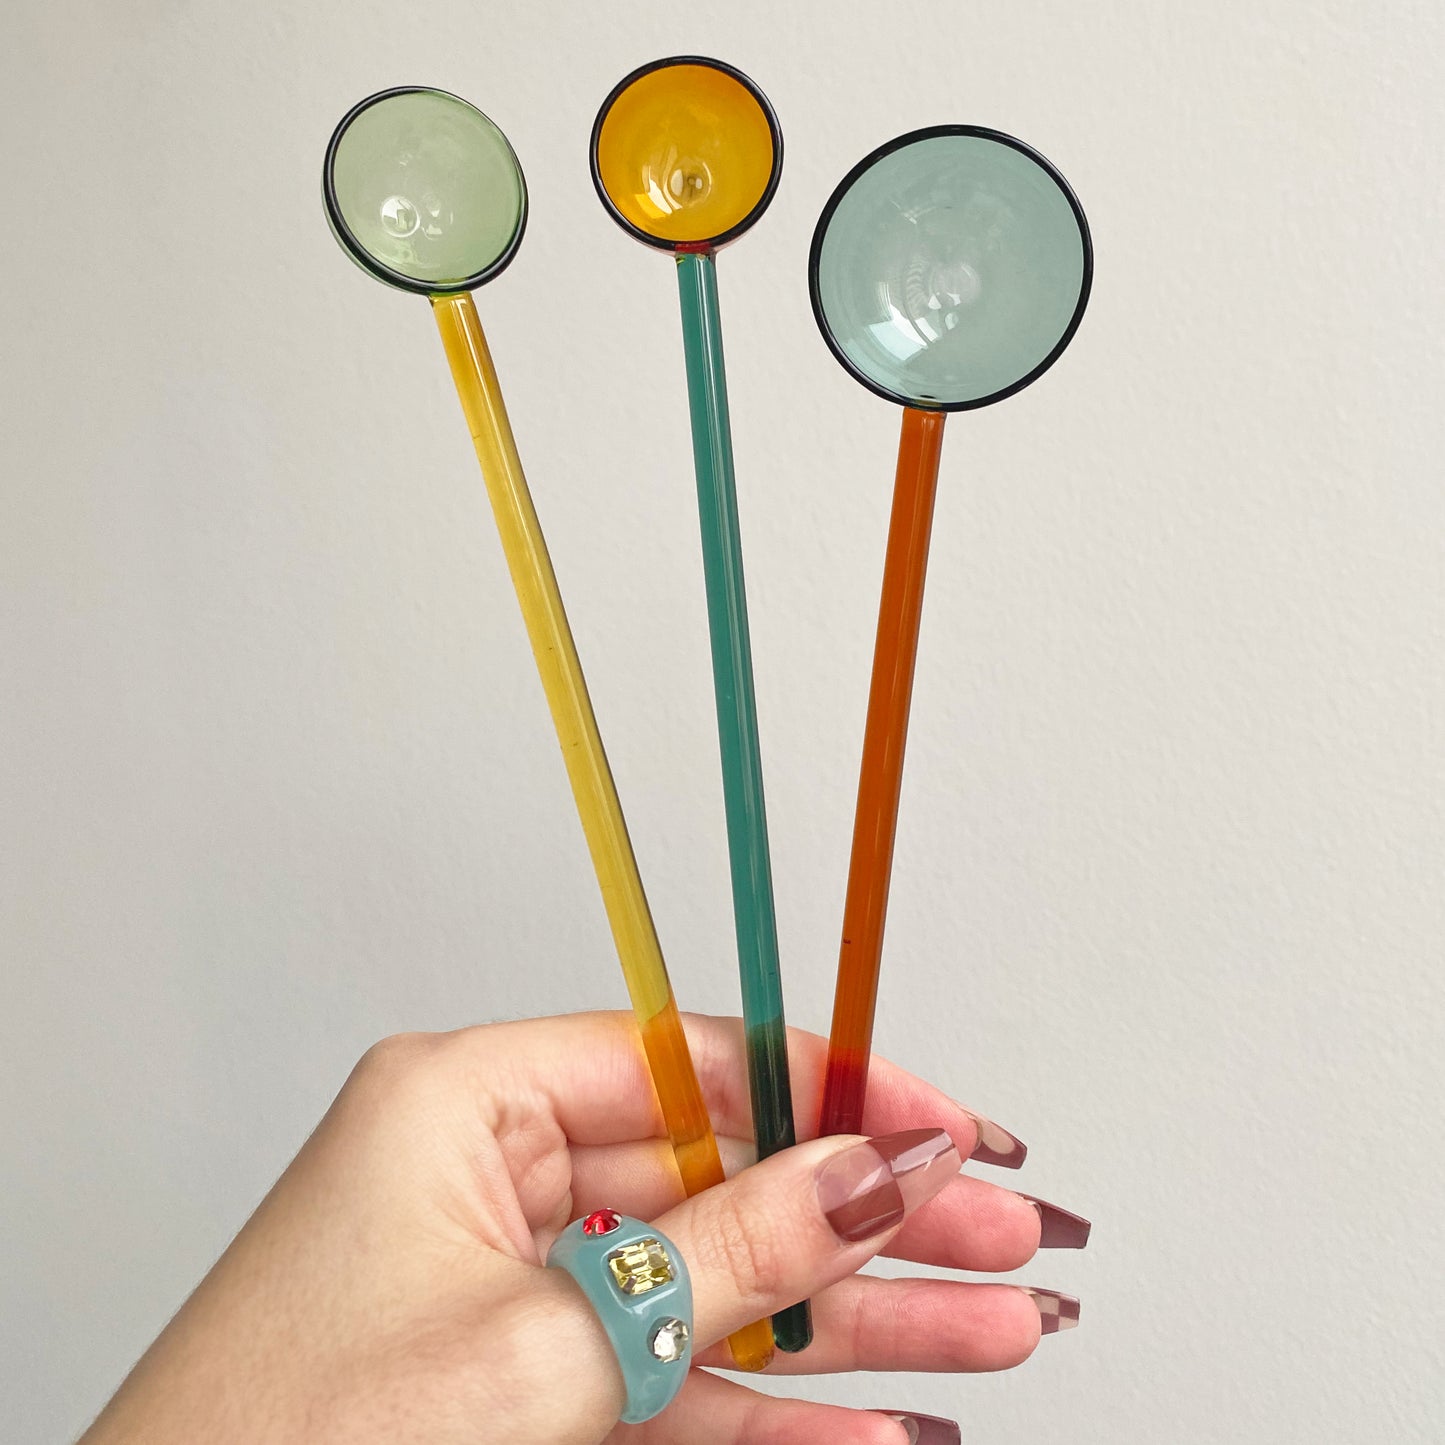 Colorblock glass measuring spoons in tablespoon and teaspoon